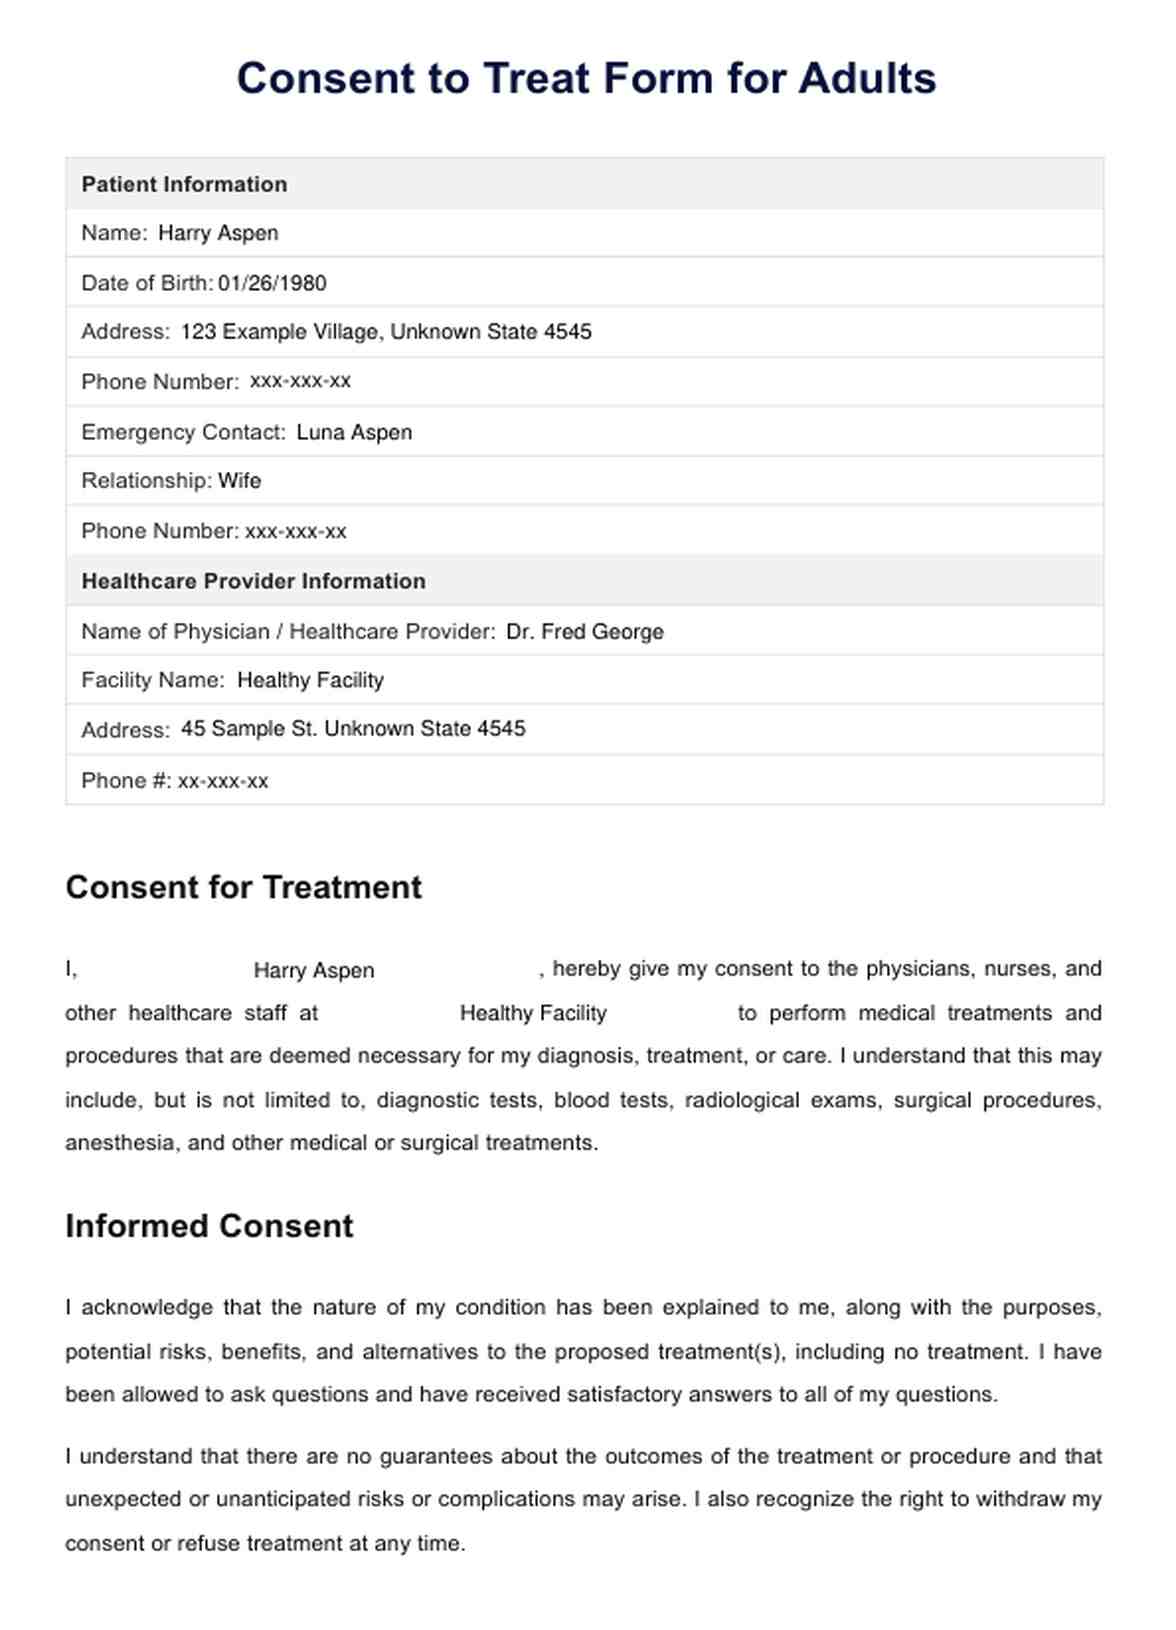 Consent to Treat Form for Adults PDF Example